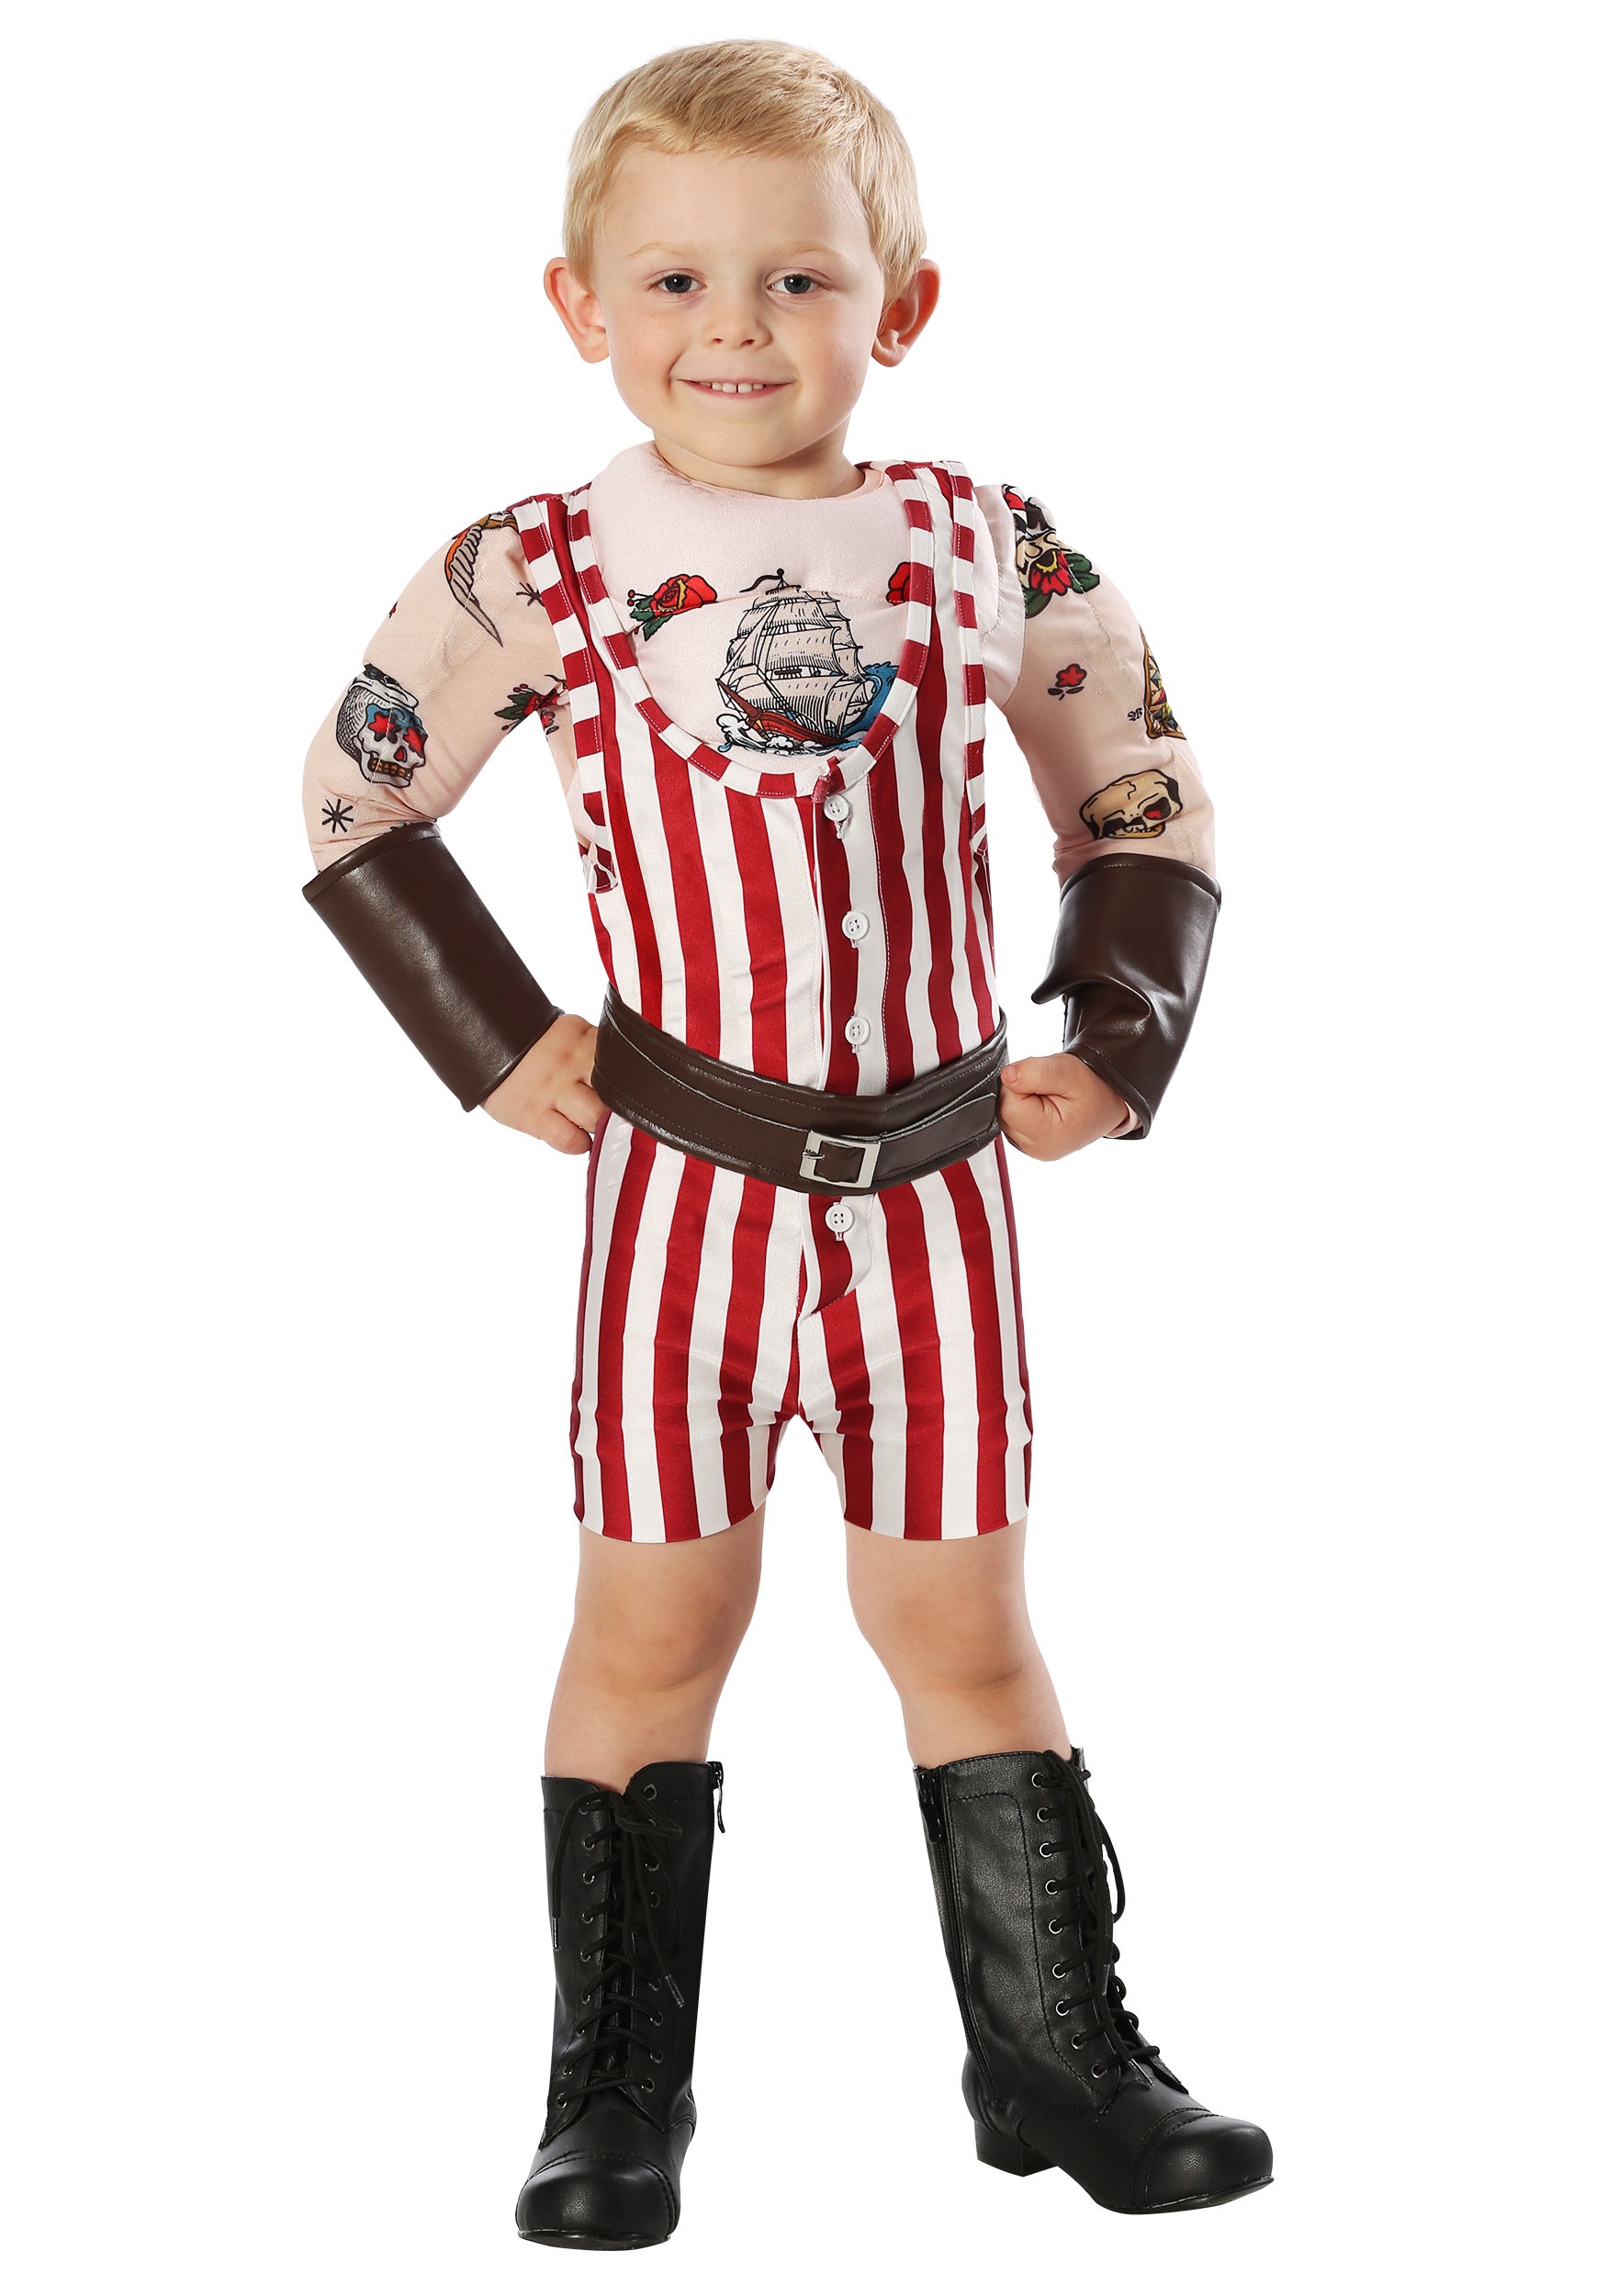 Photos - Fancy Dress Vintage FUN Costumes  Strongman Costume for Toddlers Black/Red/Whit 